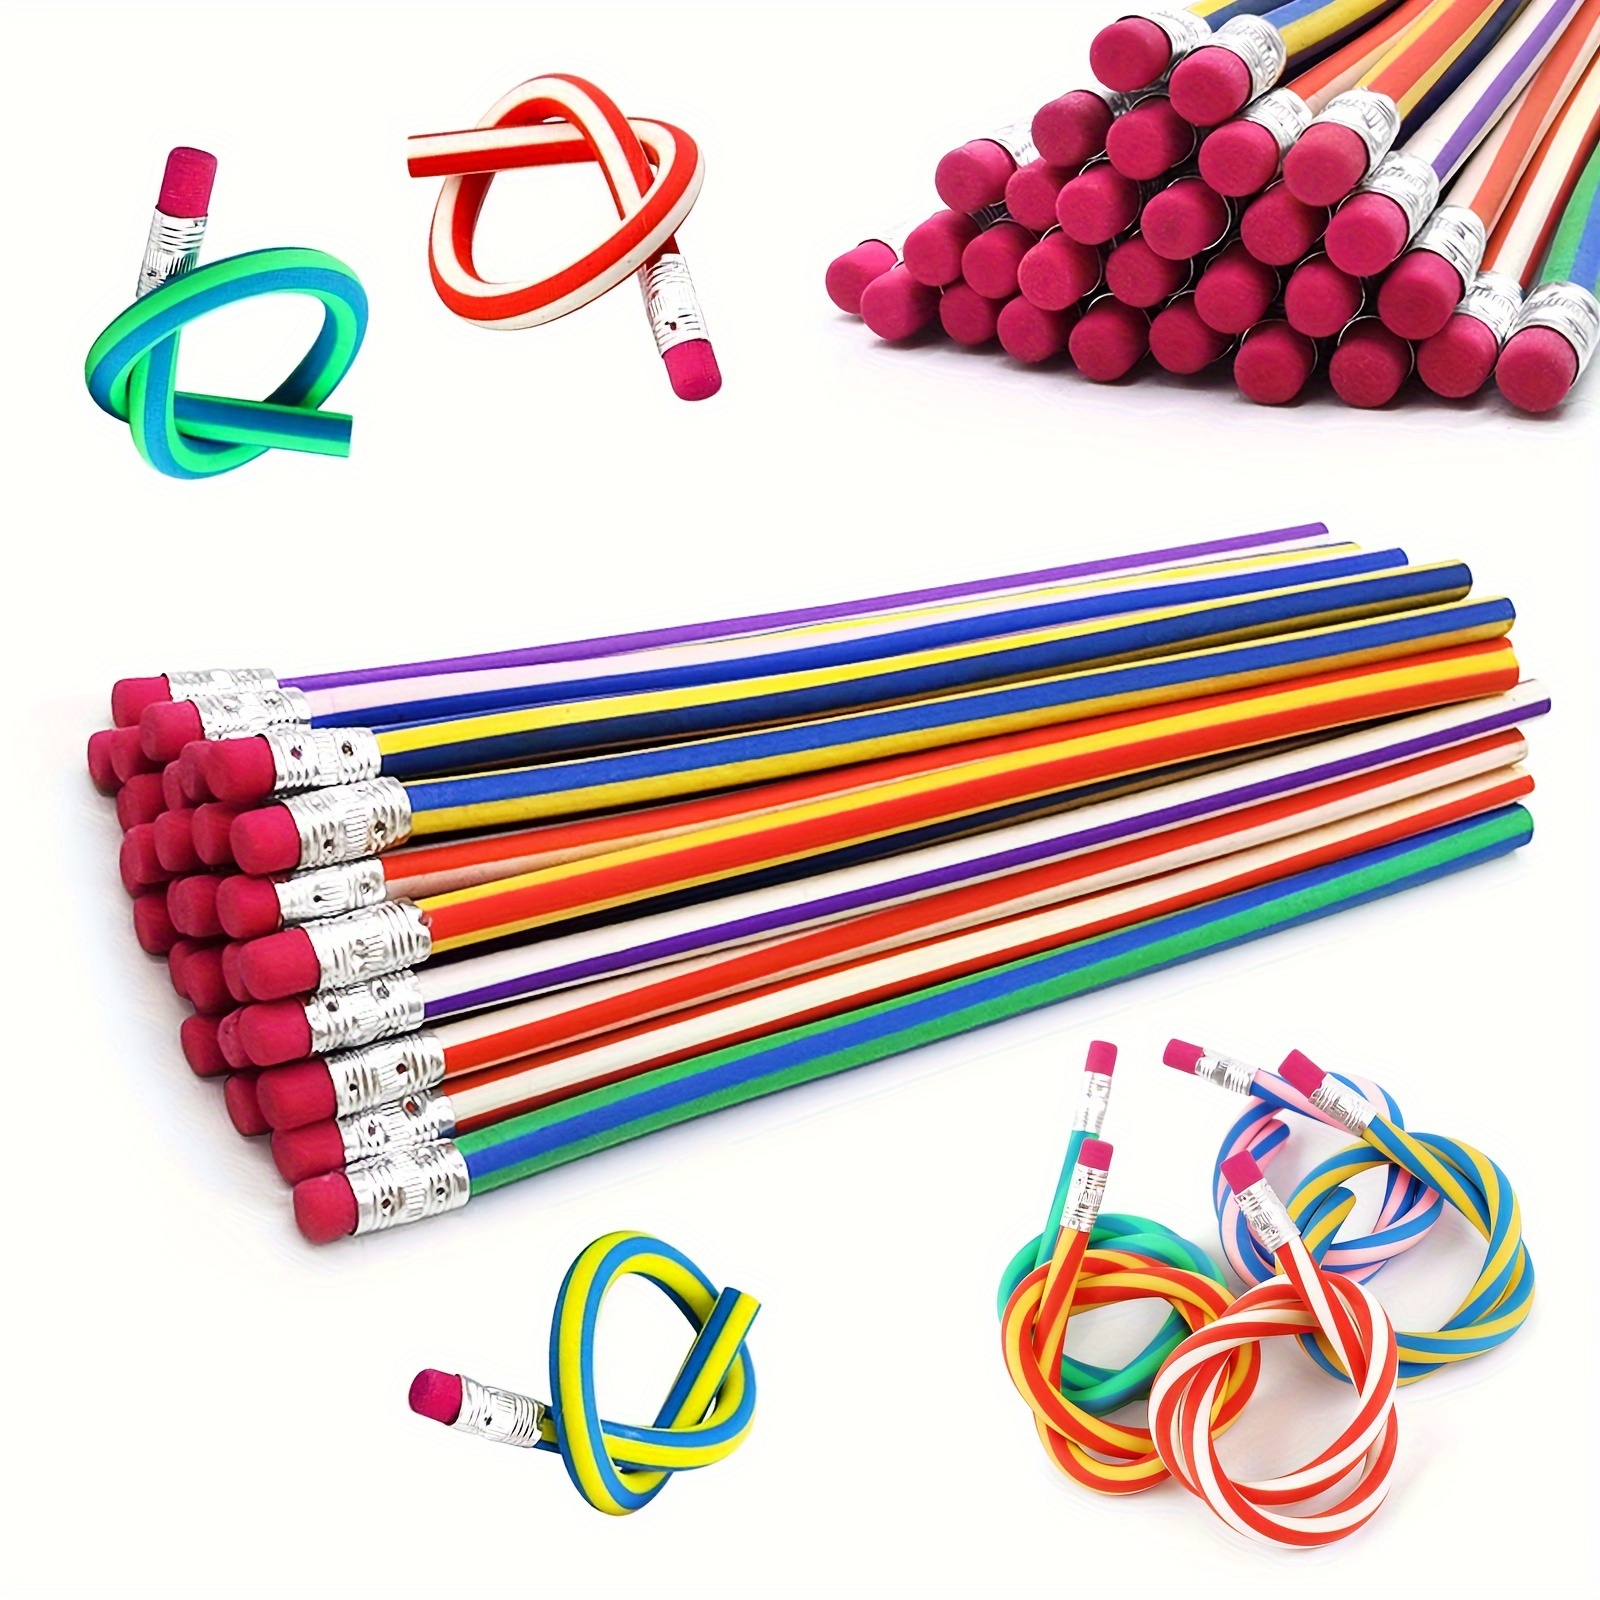 

35pcs Flexible Soft Pencils, Magic Curved Pencils, Assorted Colors For Birthday Party Favors And Bulk Carnival Prizes